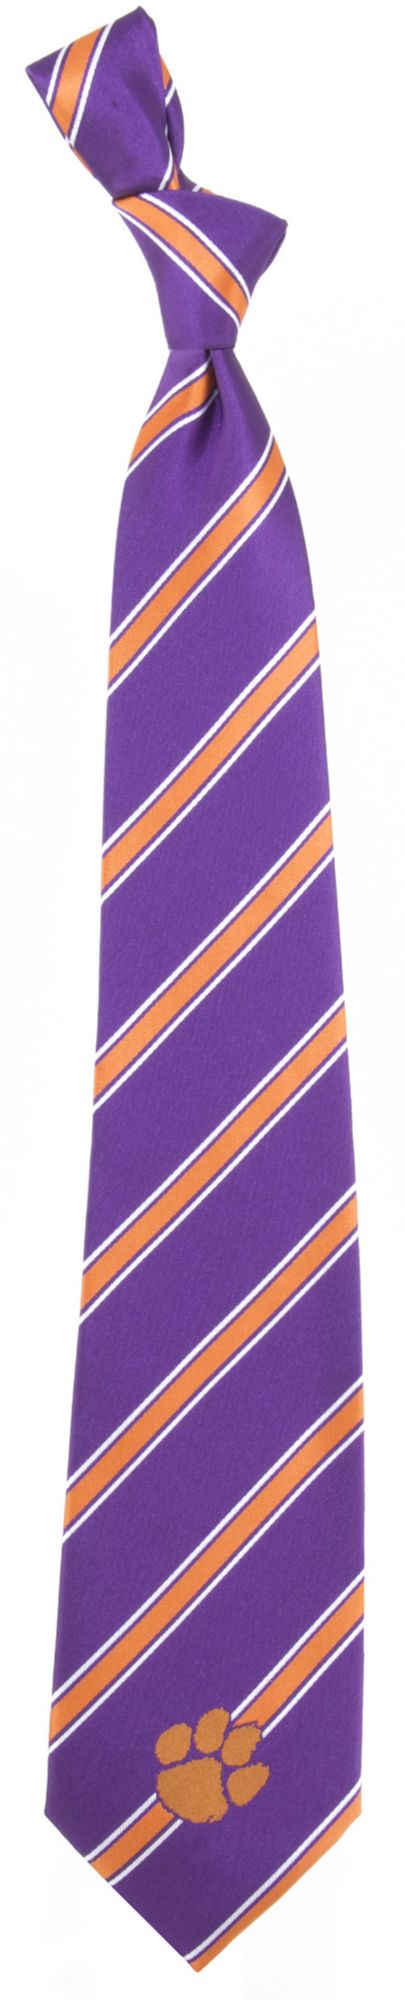 Eagles Wings Clemson Tigers Woven Poly 1 Necktie